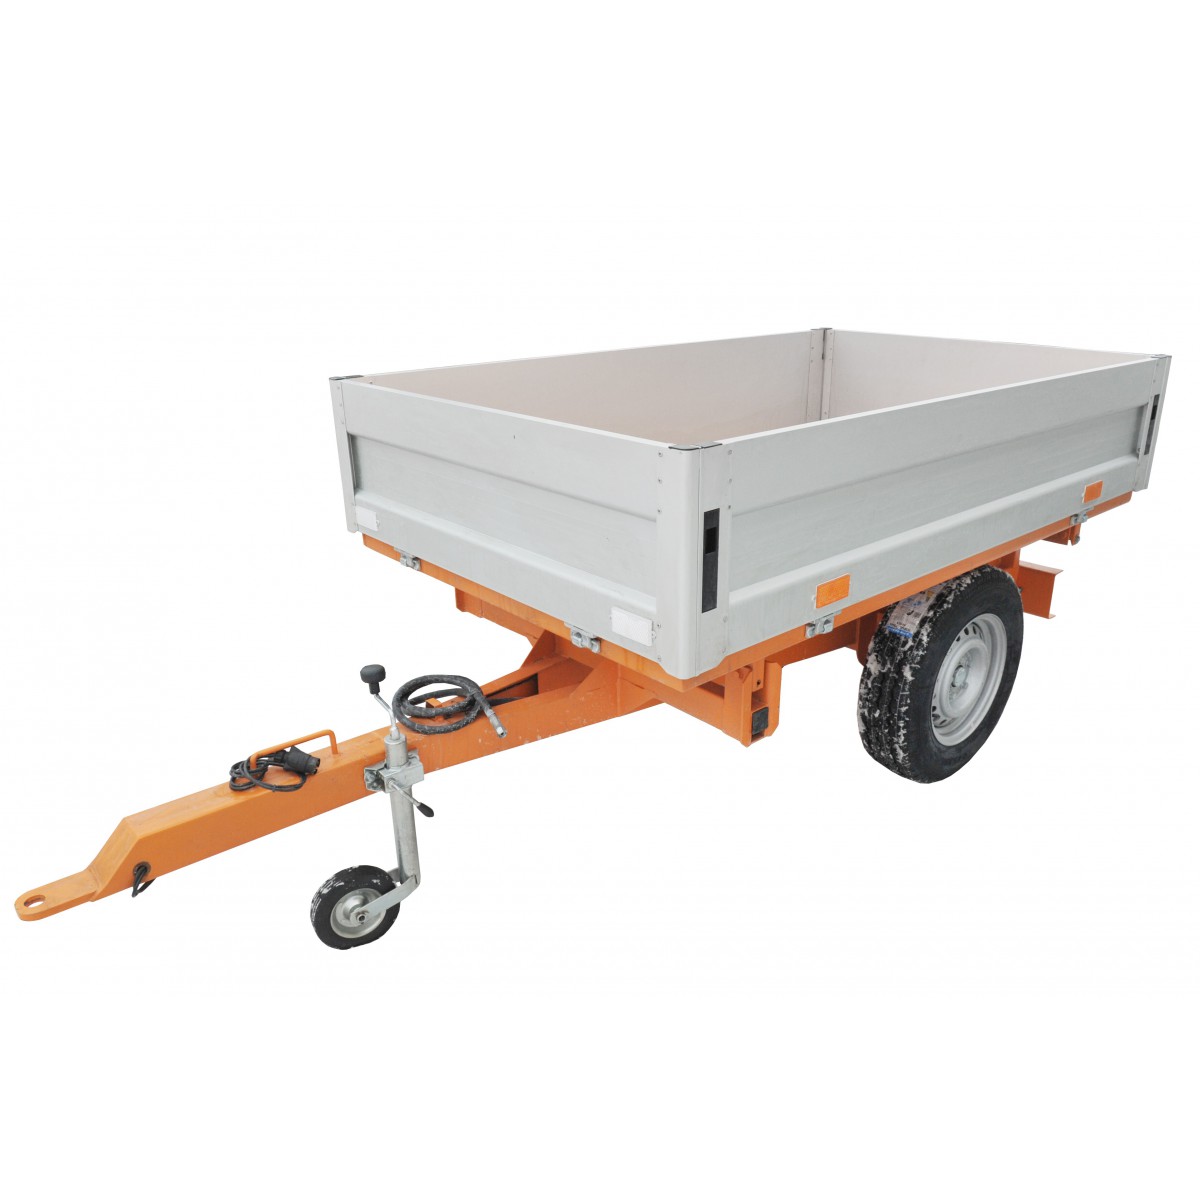 ALU Geograss single-axle agricultural trailer